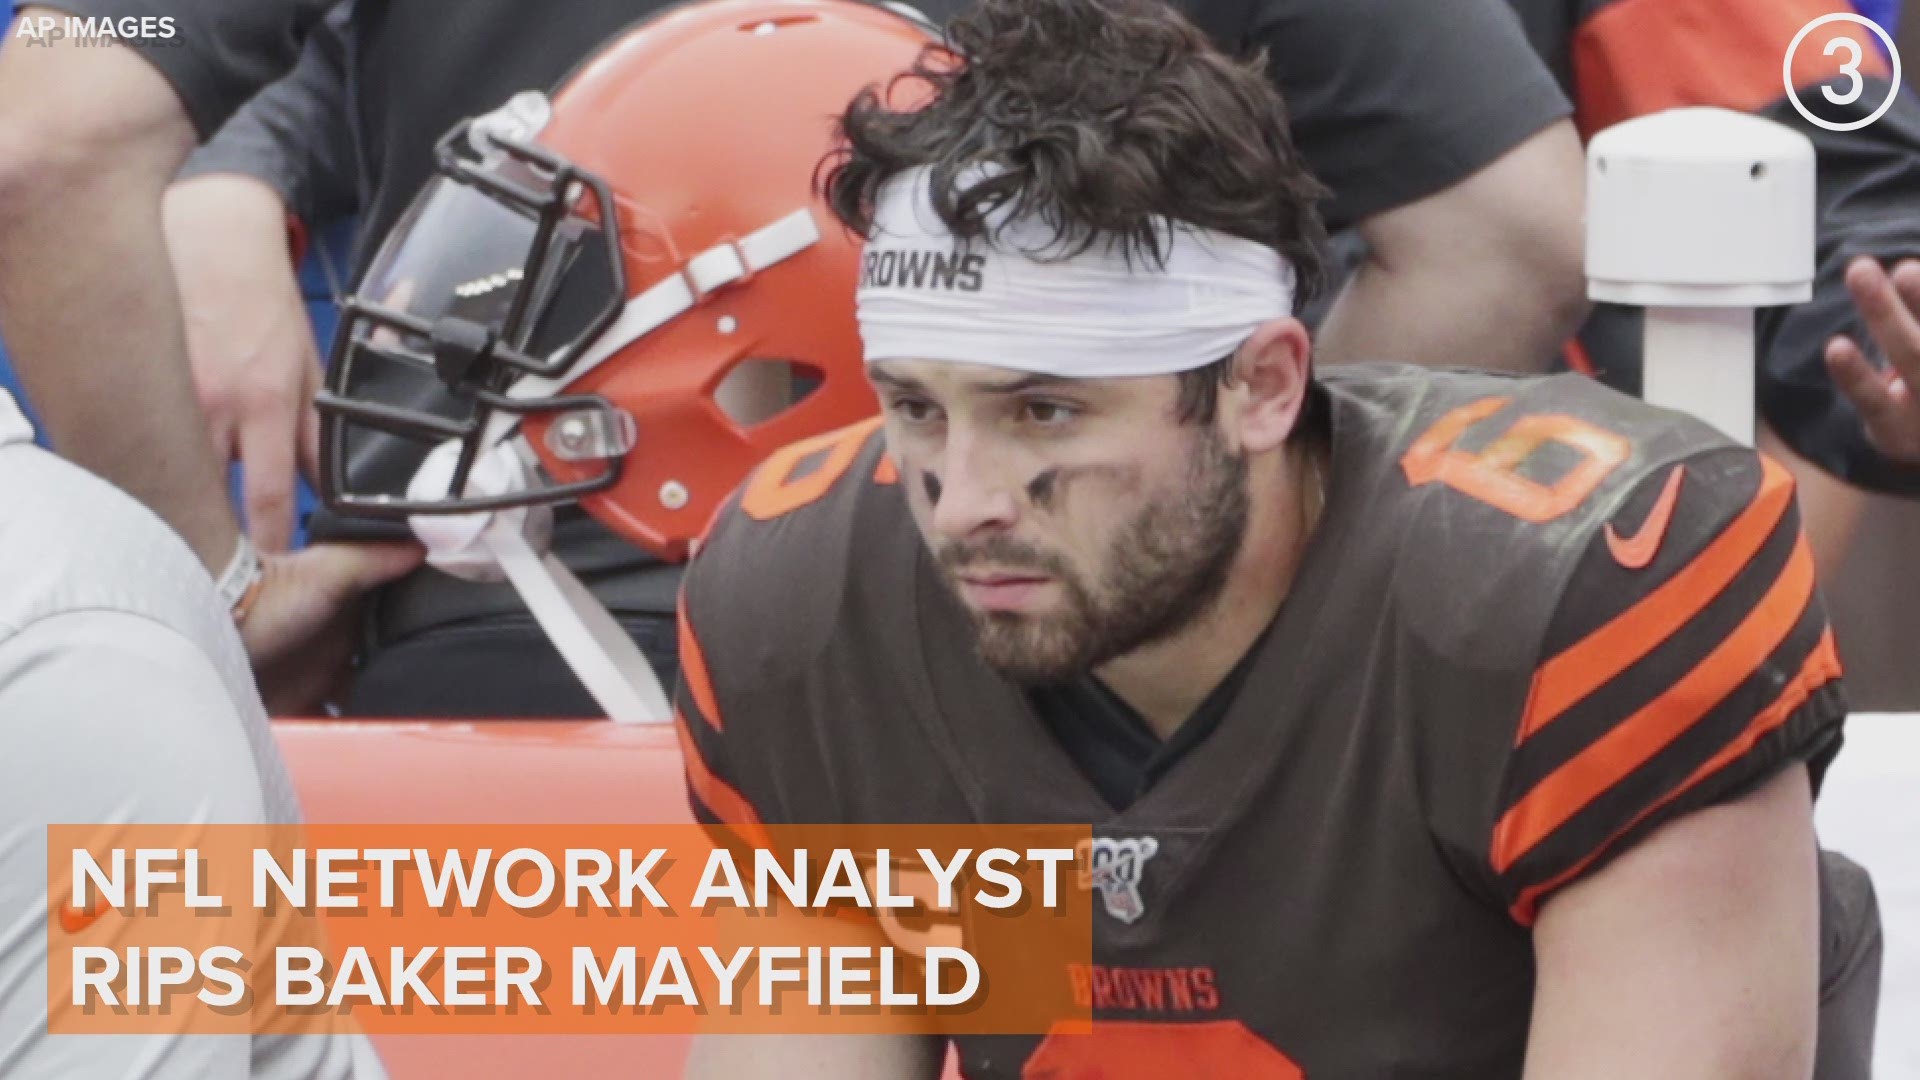 NFL Network analyst Akbar Gbaja-Biamila believes the Cleveland Browns should move on from Baker Mayfield and sign veteran quarterback Case Keenum in free agency.